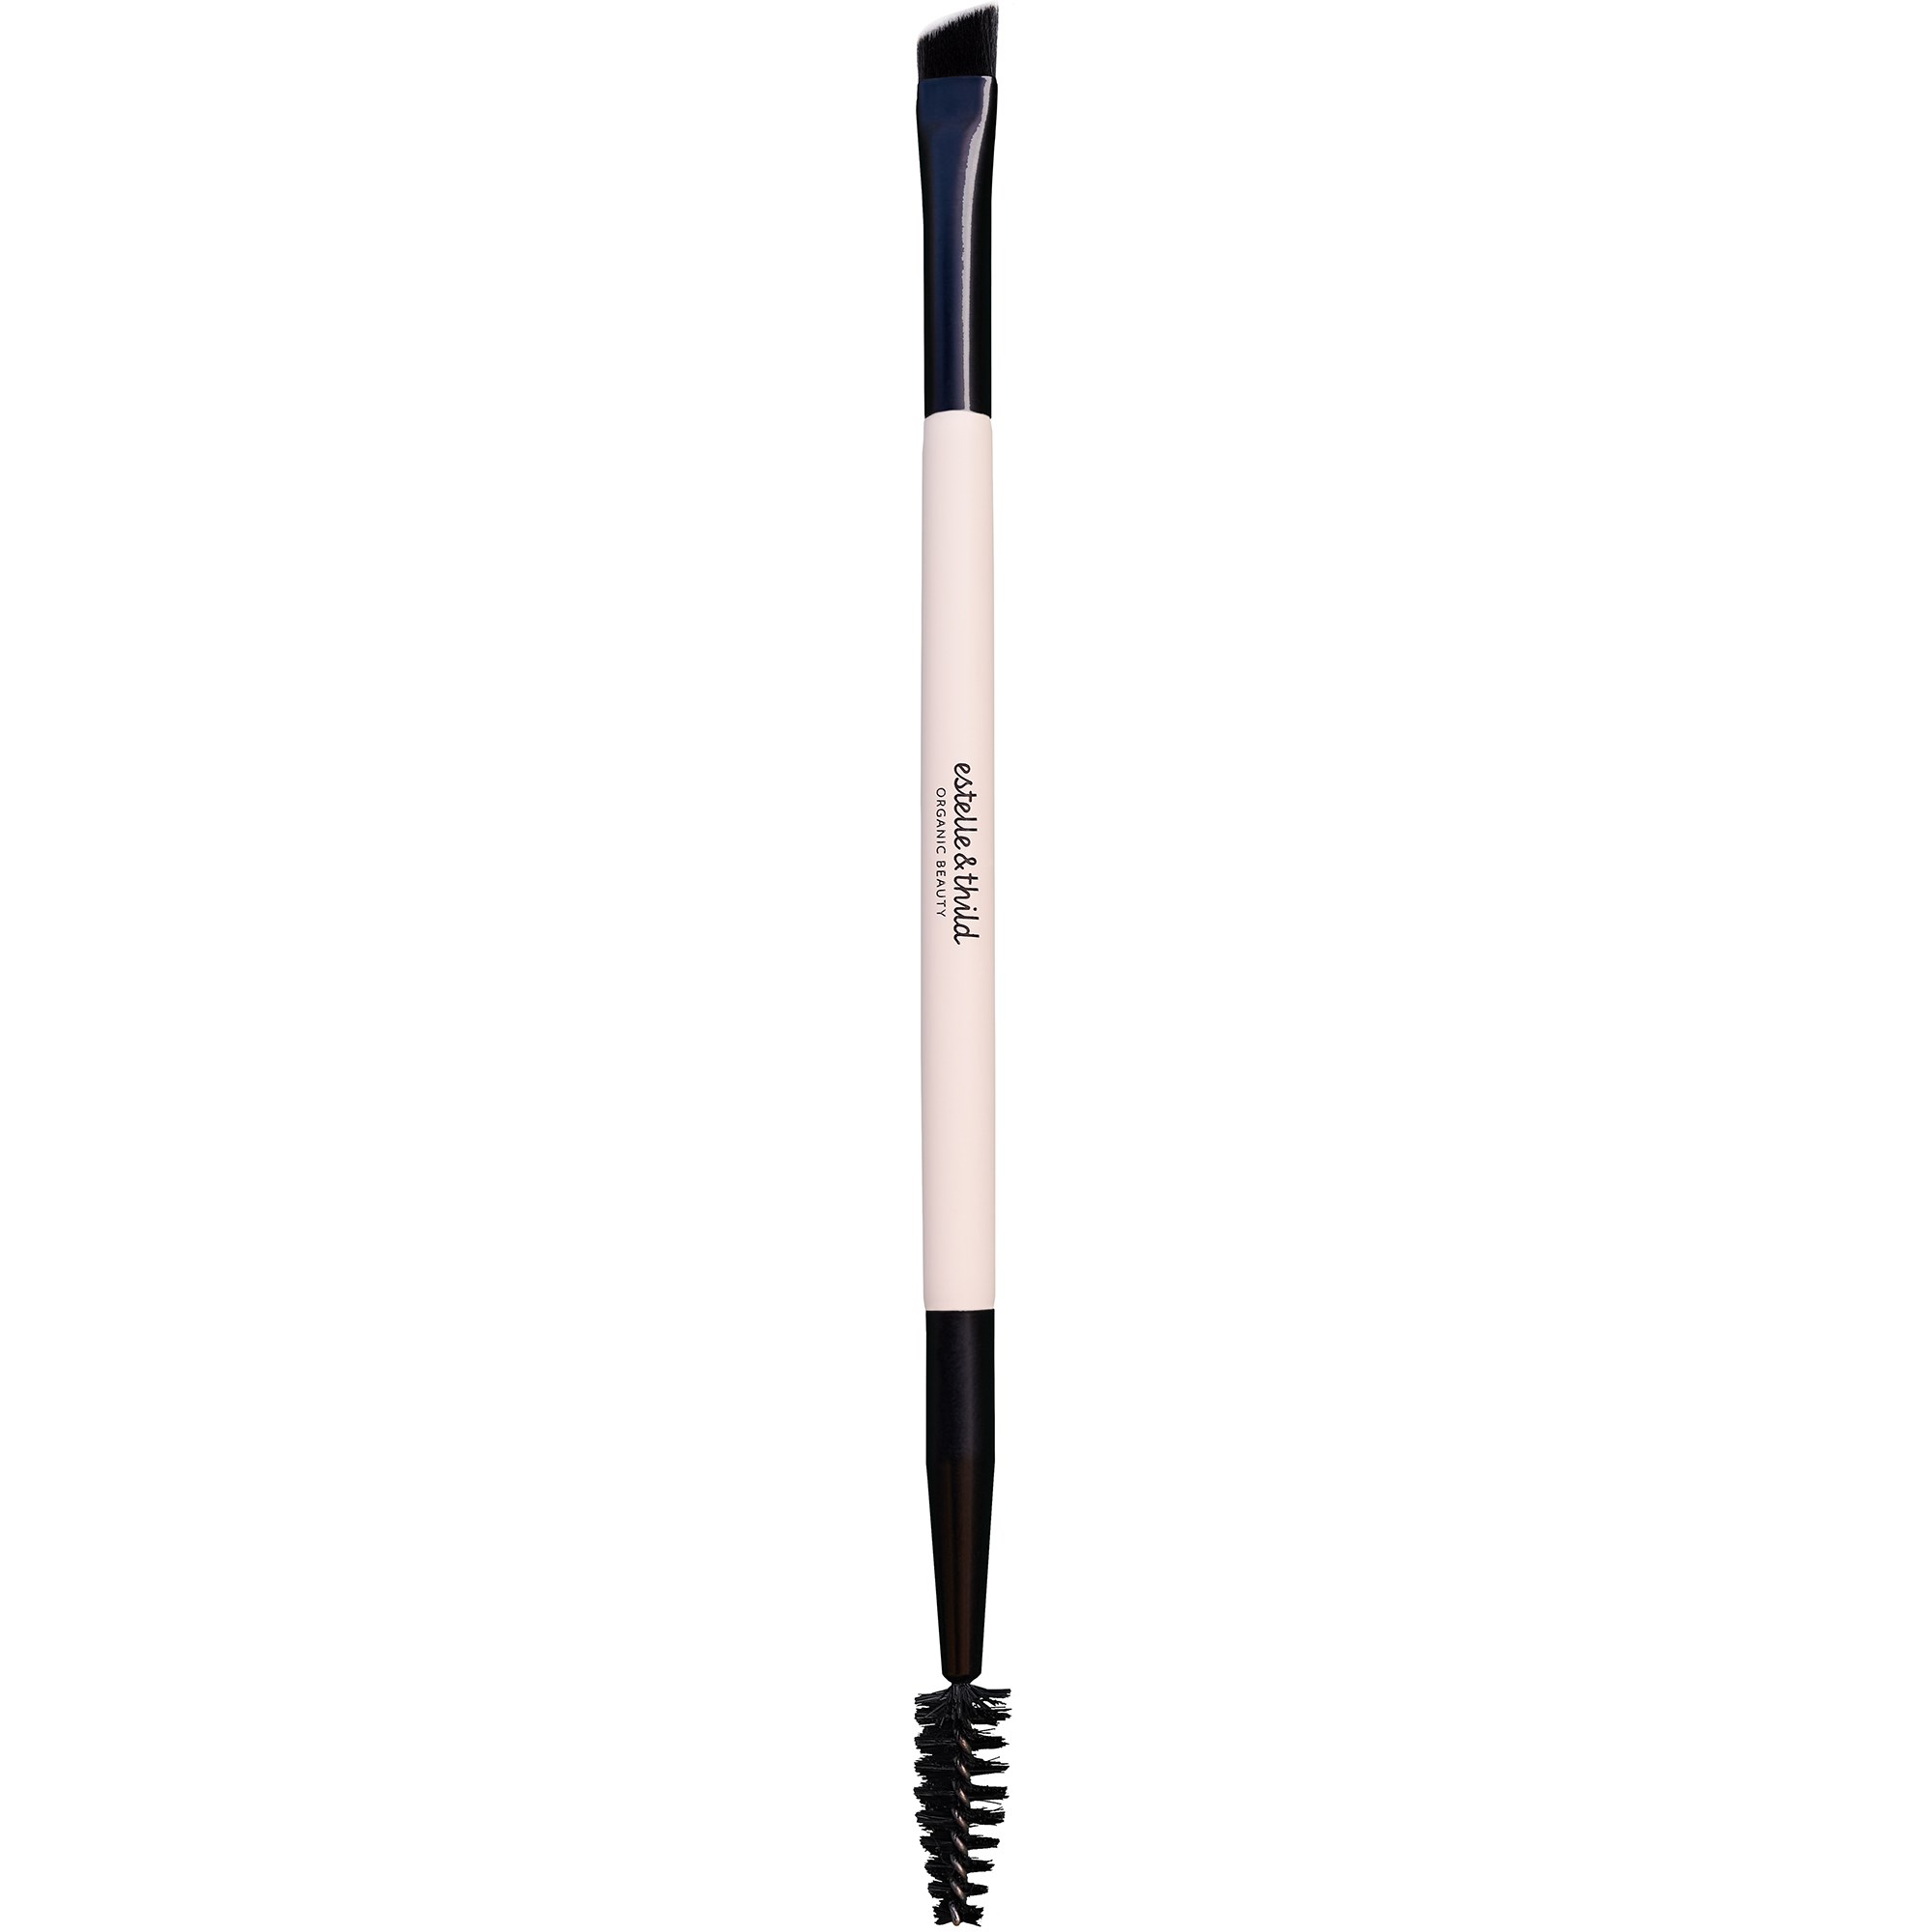 Estelle & Thild BioMineral Double Ended Eyebrow Brush